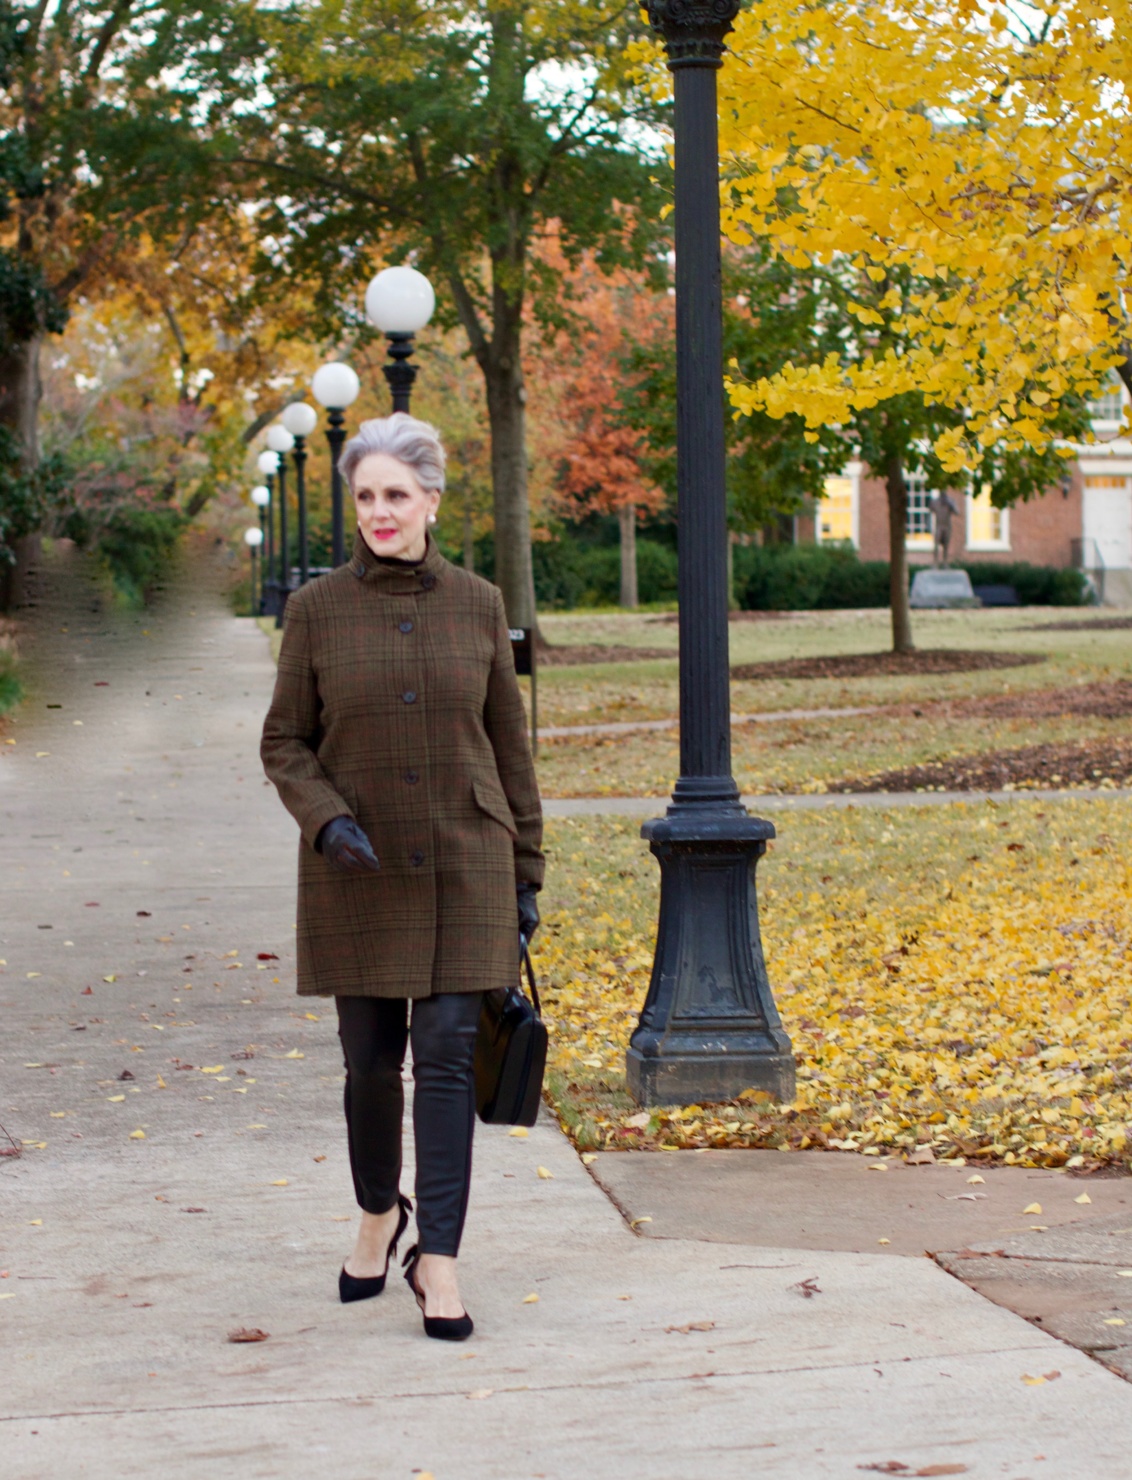 beth from Style at a Certain Age wears a black cashmere Turtleneck dress, faux leather leggings and suede pumps.